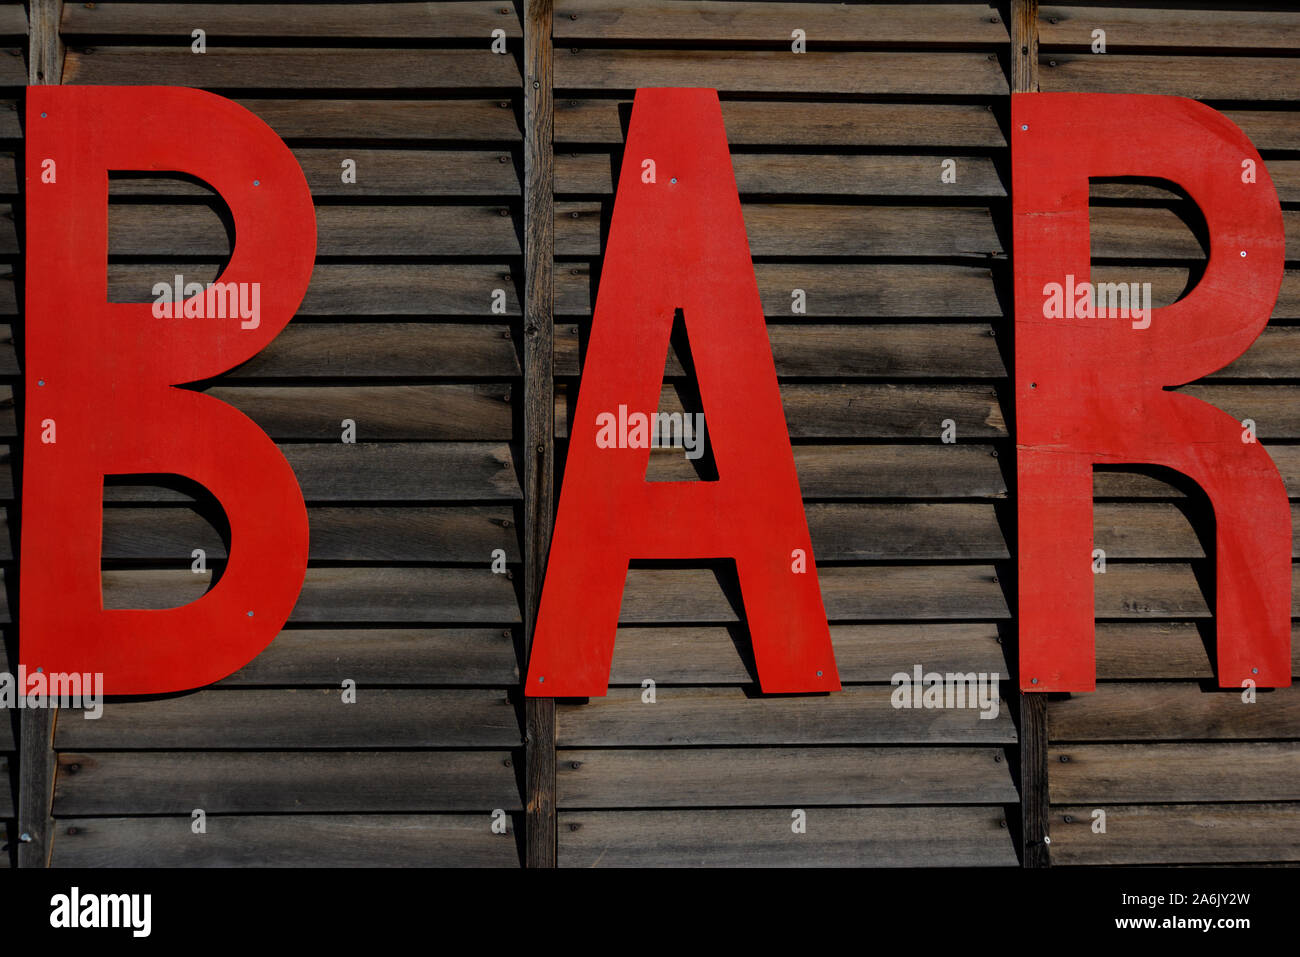 The word BAR in large red capital letters on a brown wooden slatted fence Stock Photo